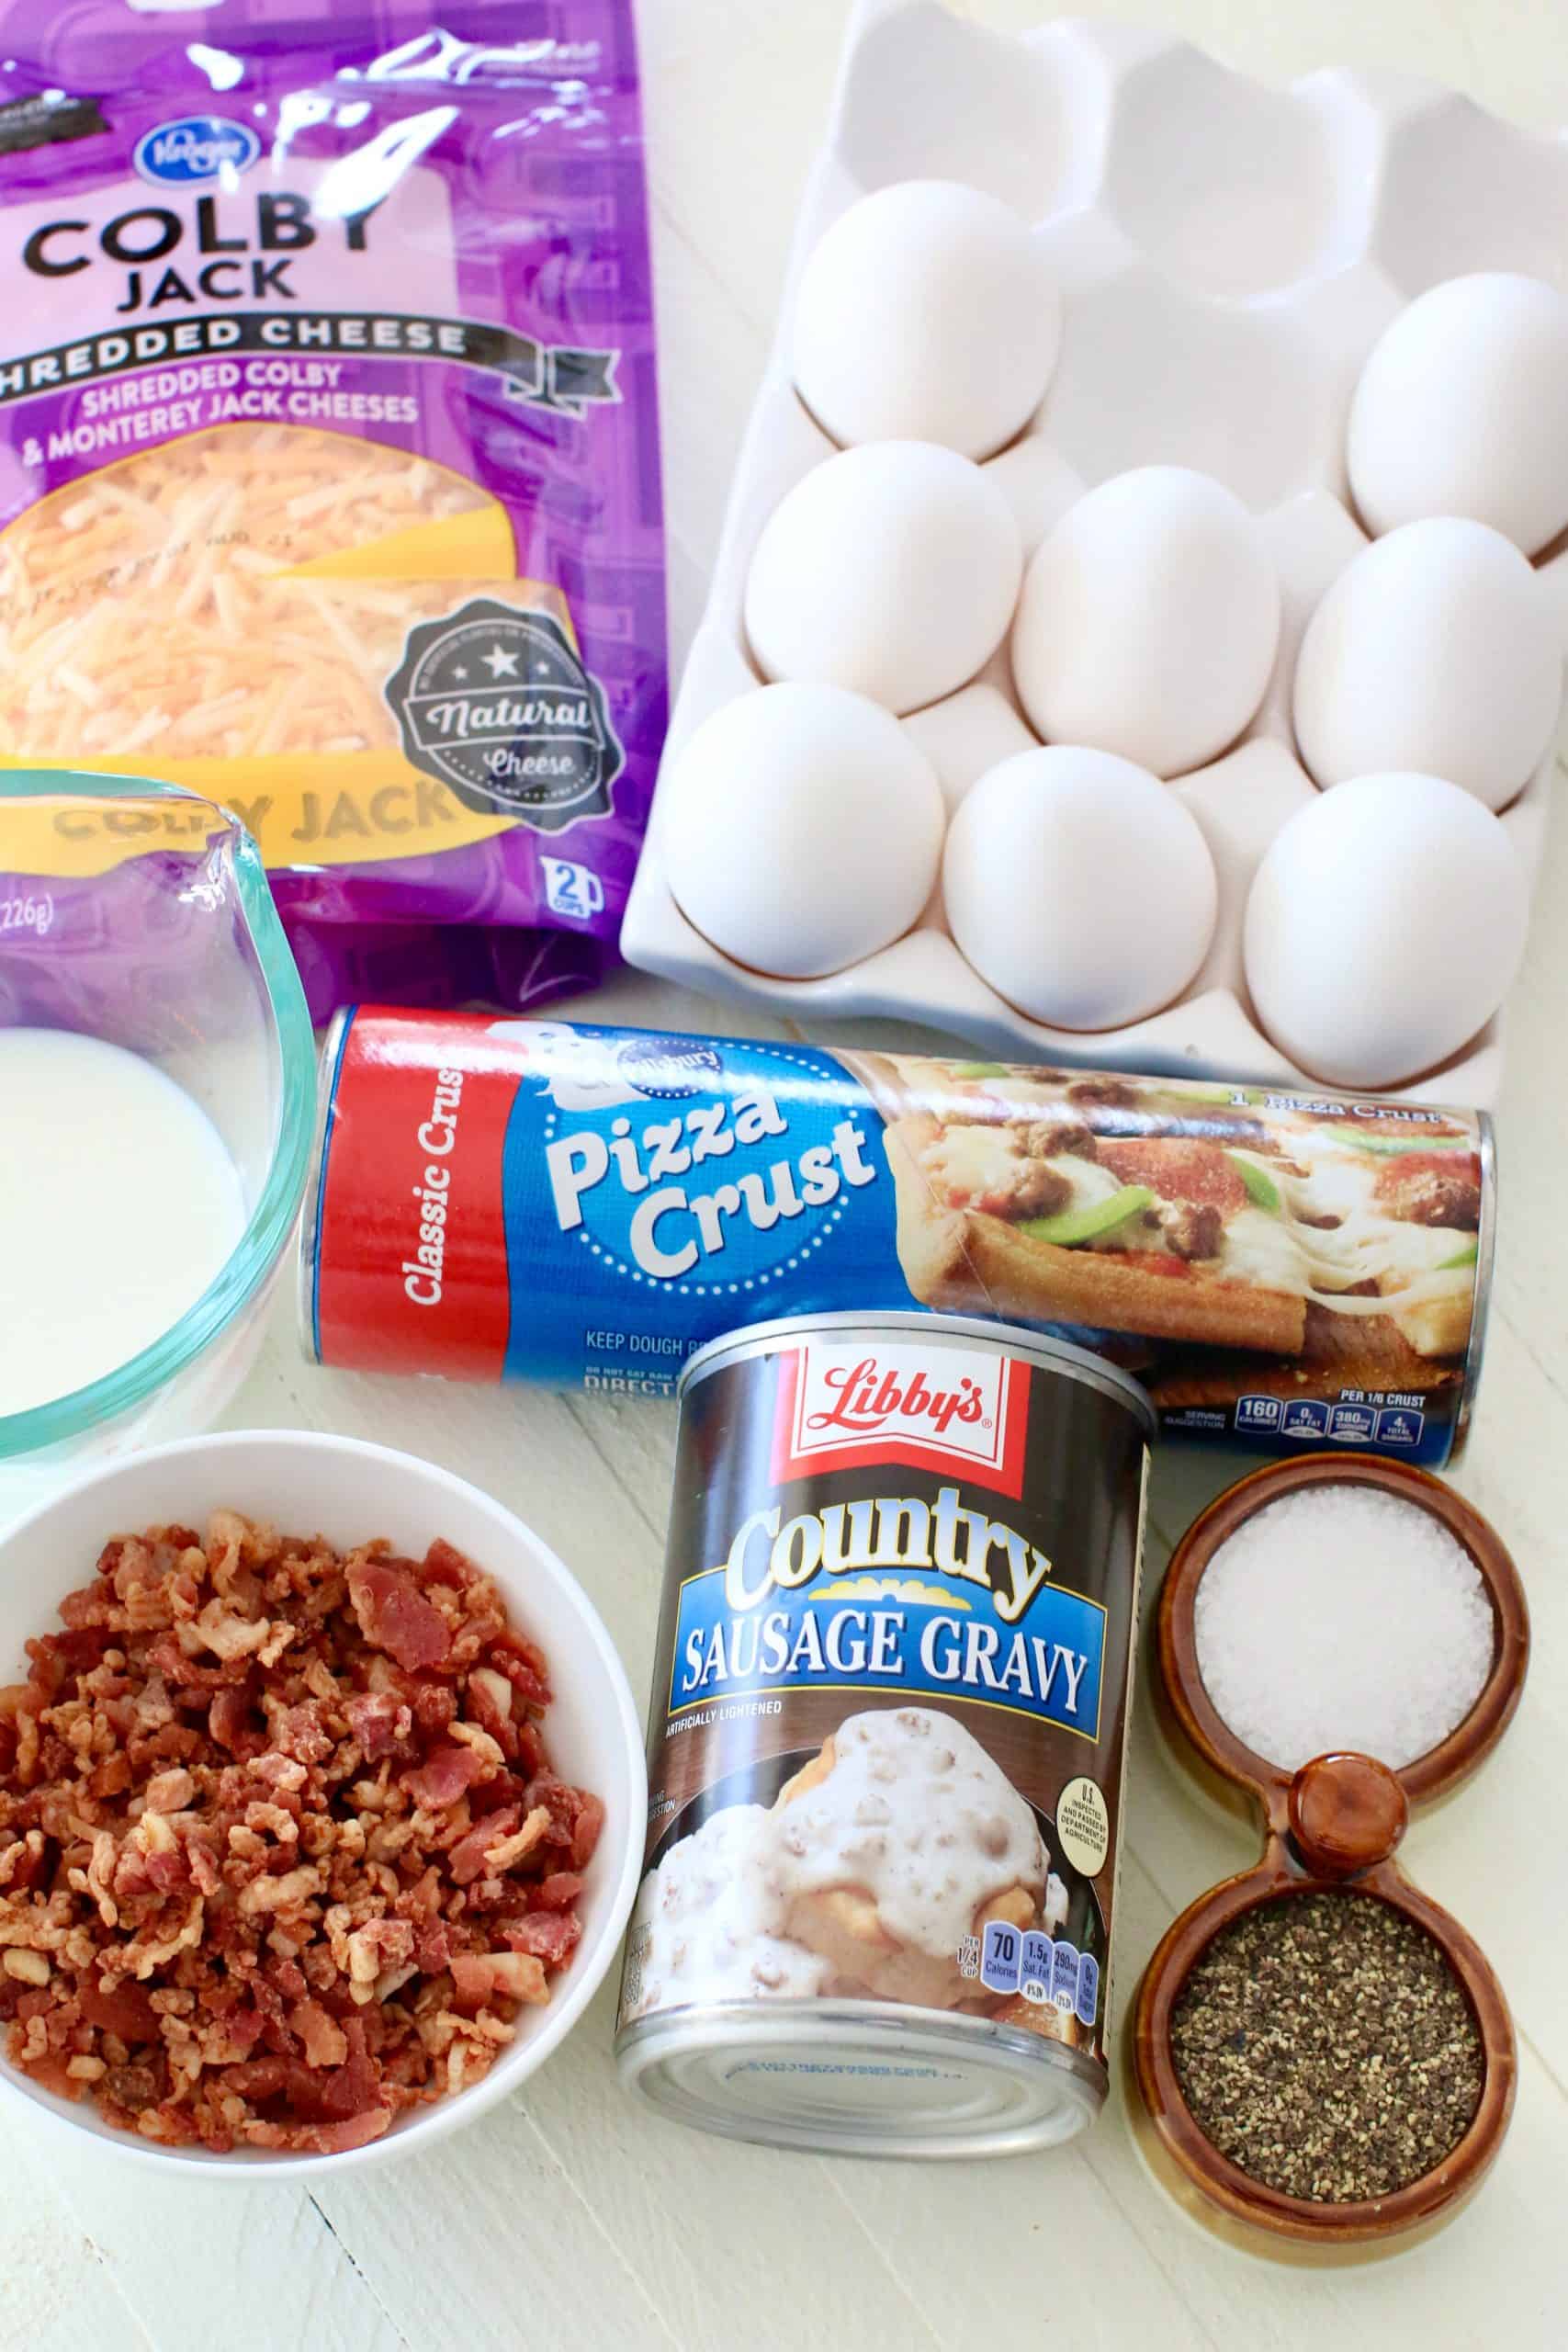 Breakfast Pizza ingredients: refrigerated pizza crust, large eggs, salt snd pepper, milk, Libby's Country Sausage Gravy, shredded Colby jack cheese, bacon pieces.